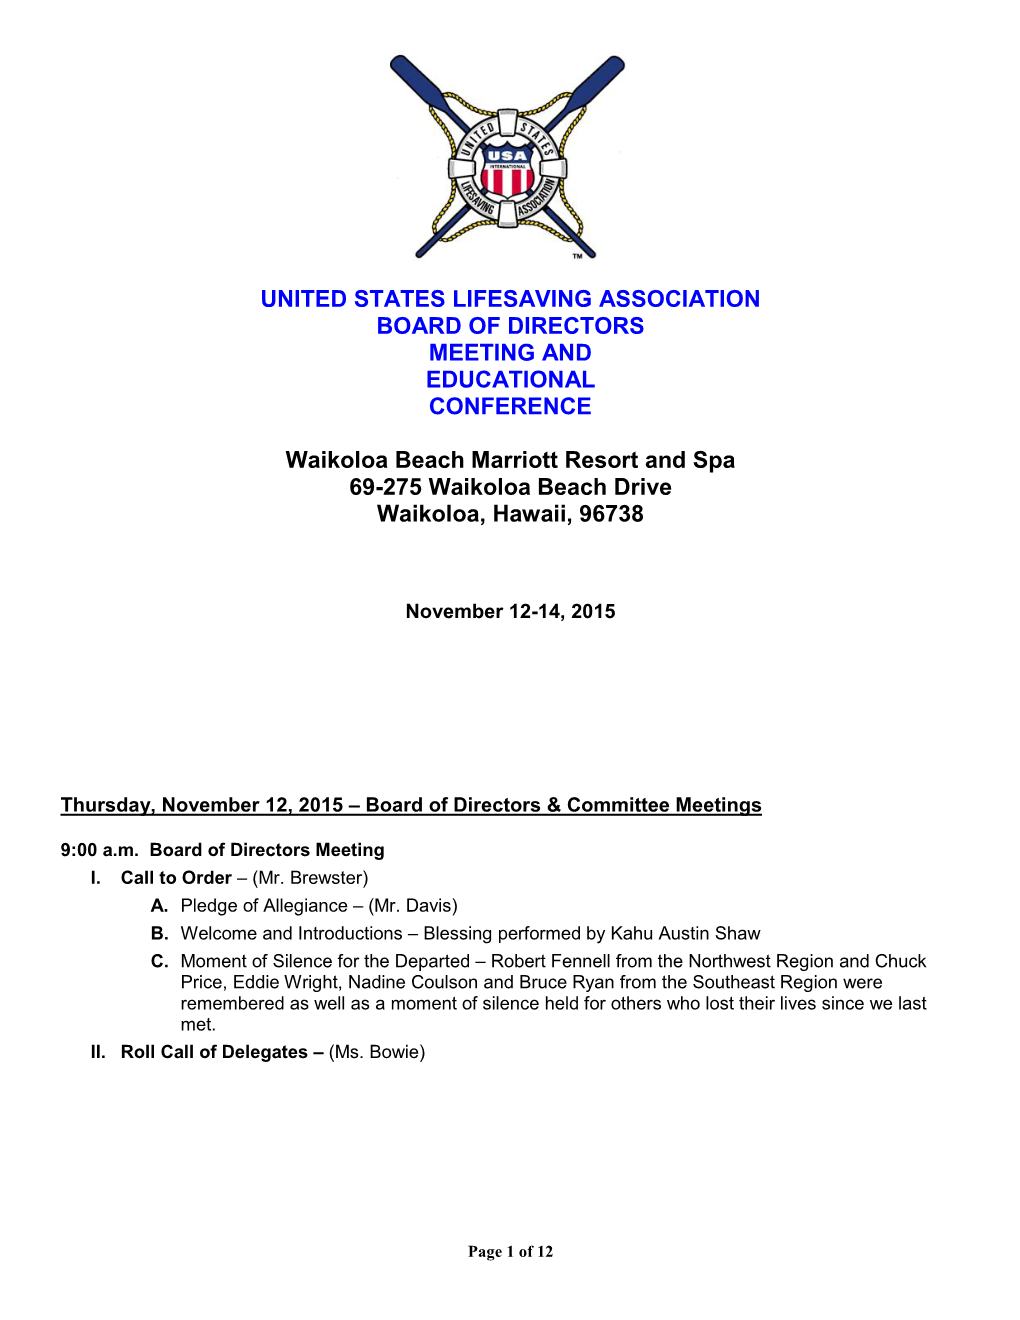 United States Lifesaving Association Board of Directors Meeting and Educational Conference